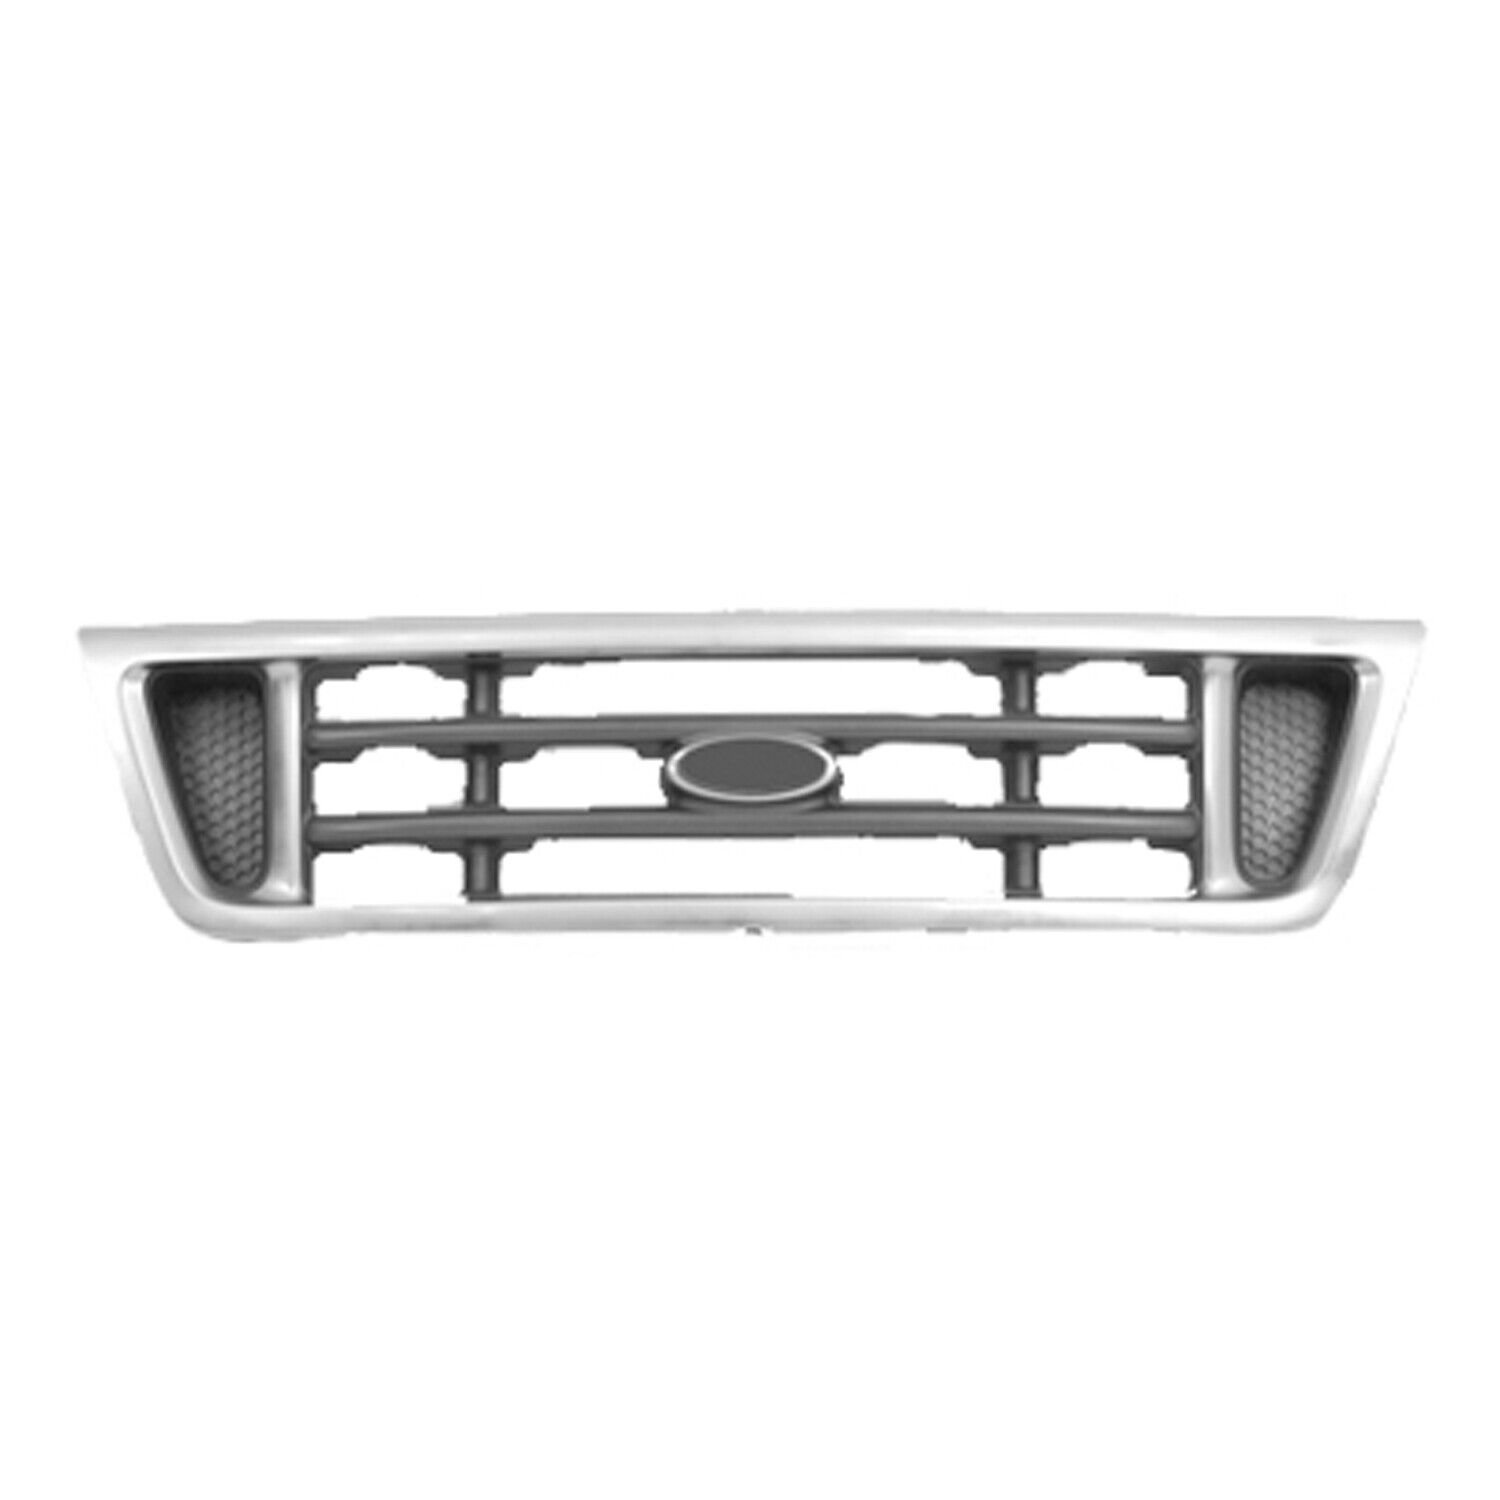 FO1200428 New Grille Fits 2003-2007 Ford Econoline